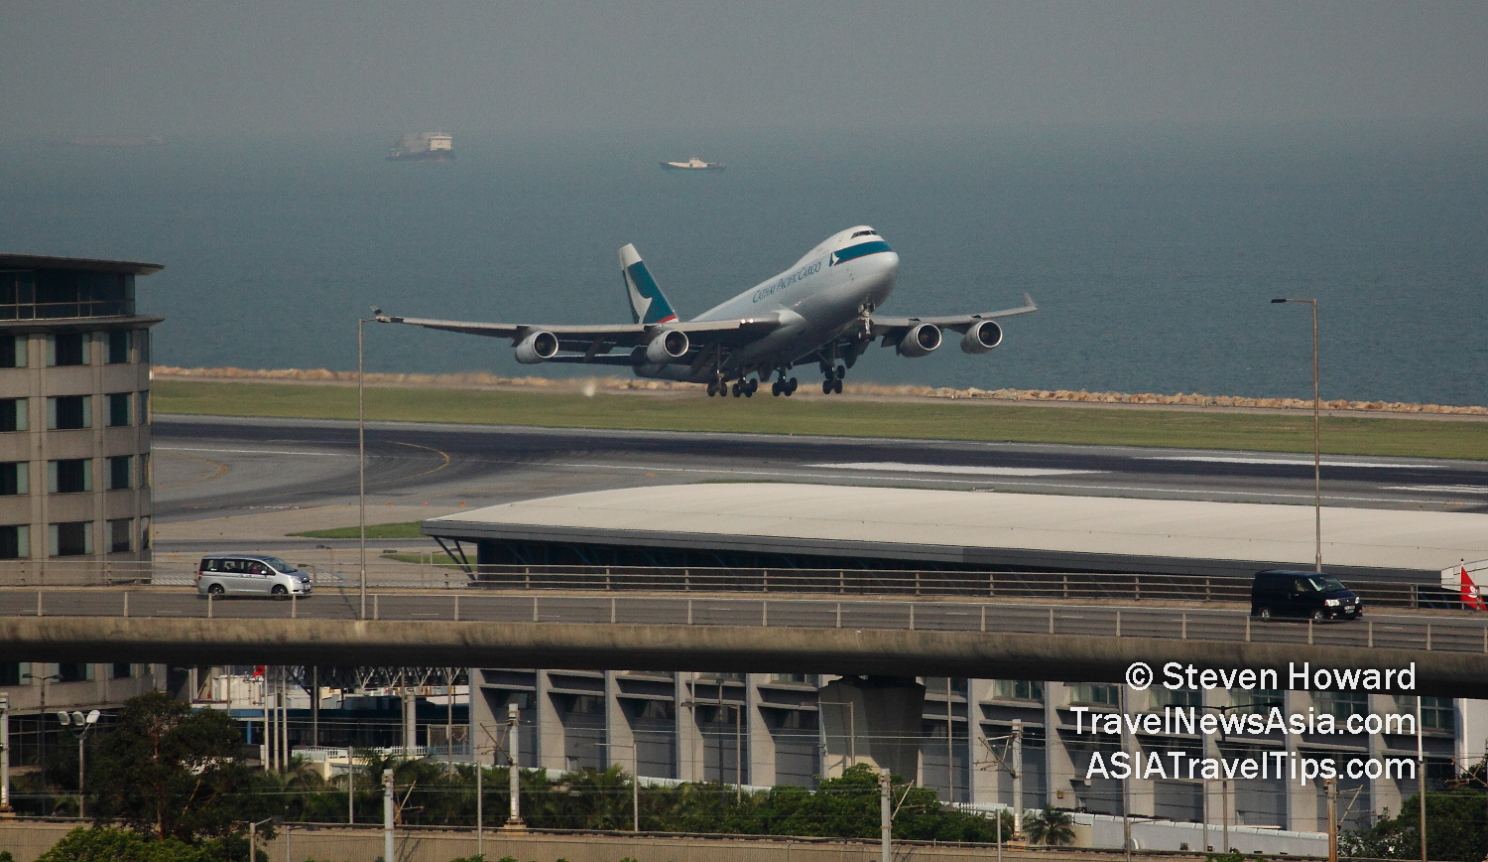 Cathay Pacific B747F taking off from HKIA. Picture by Steven Howard of TravelNewsAsia.com Click to enlarge.